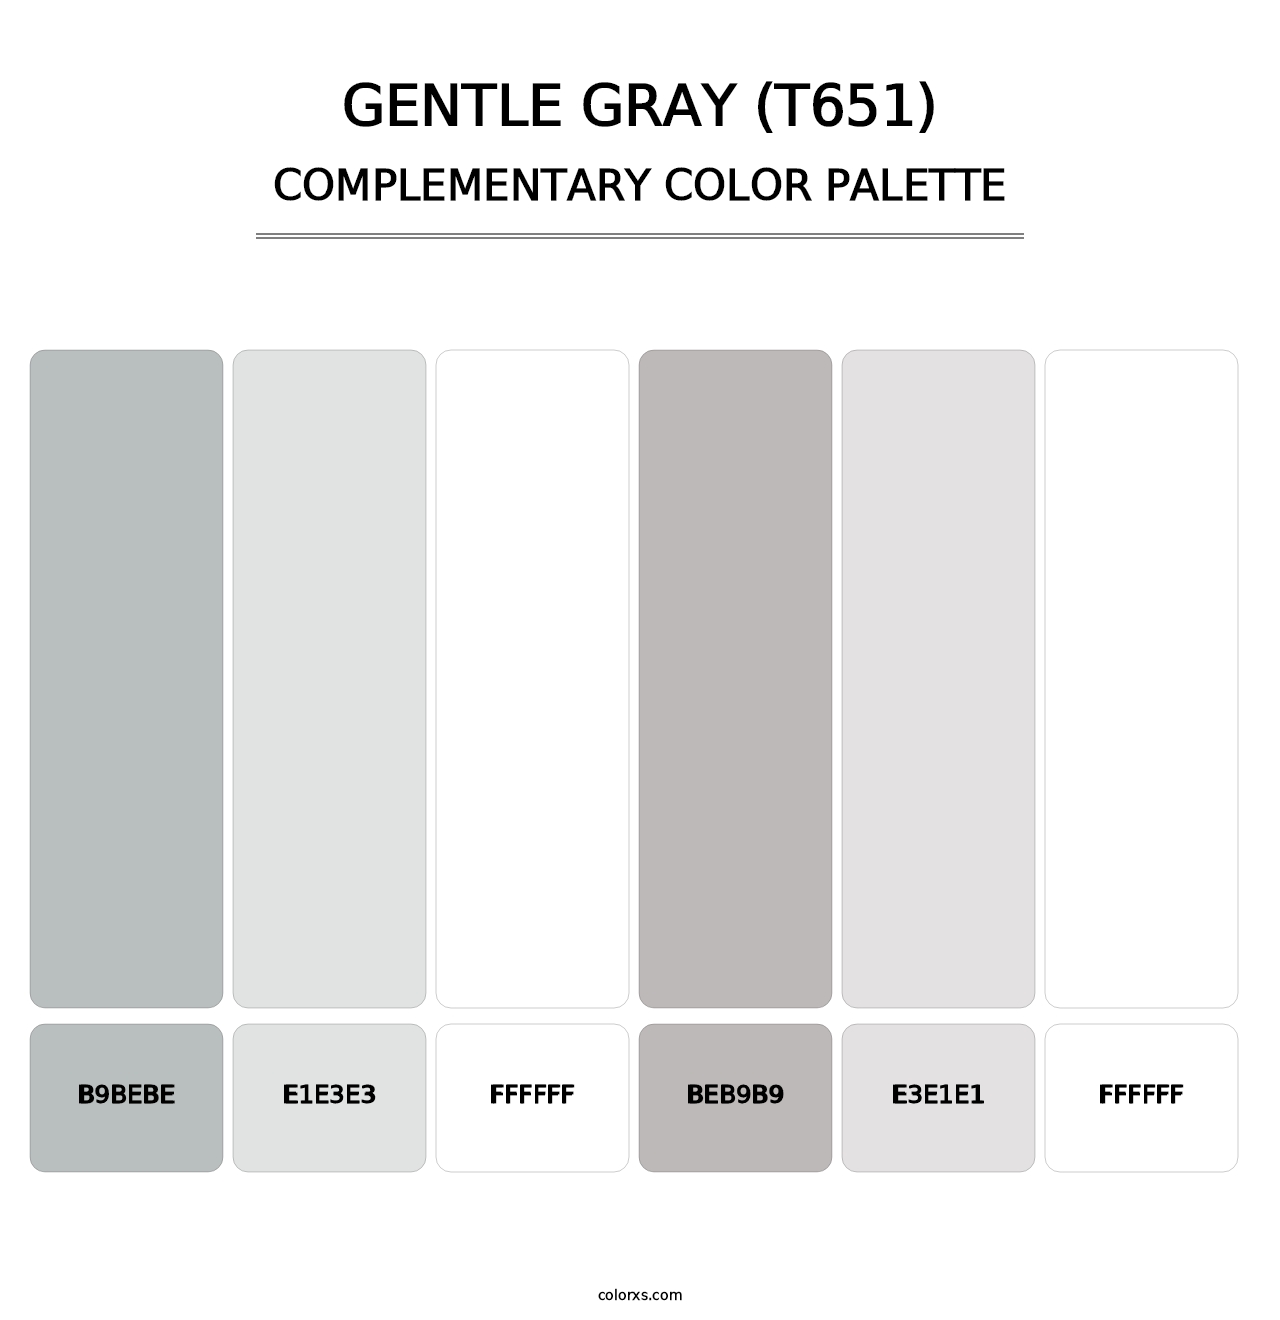 Gentle Gray (T651) - Complementary Color Palette